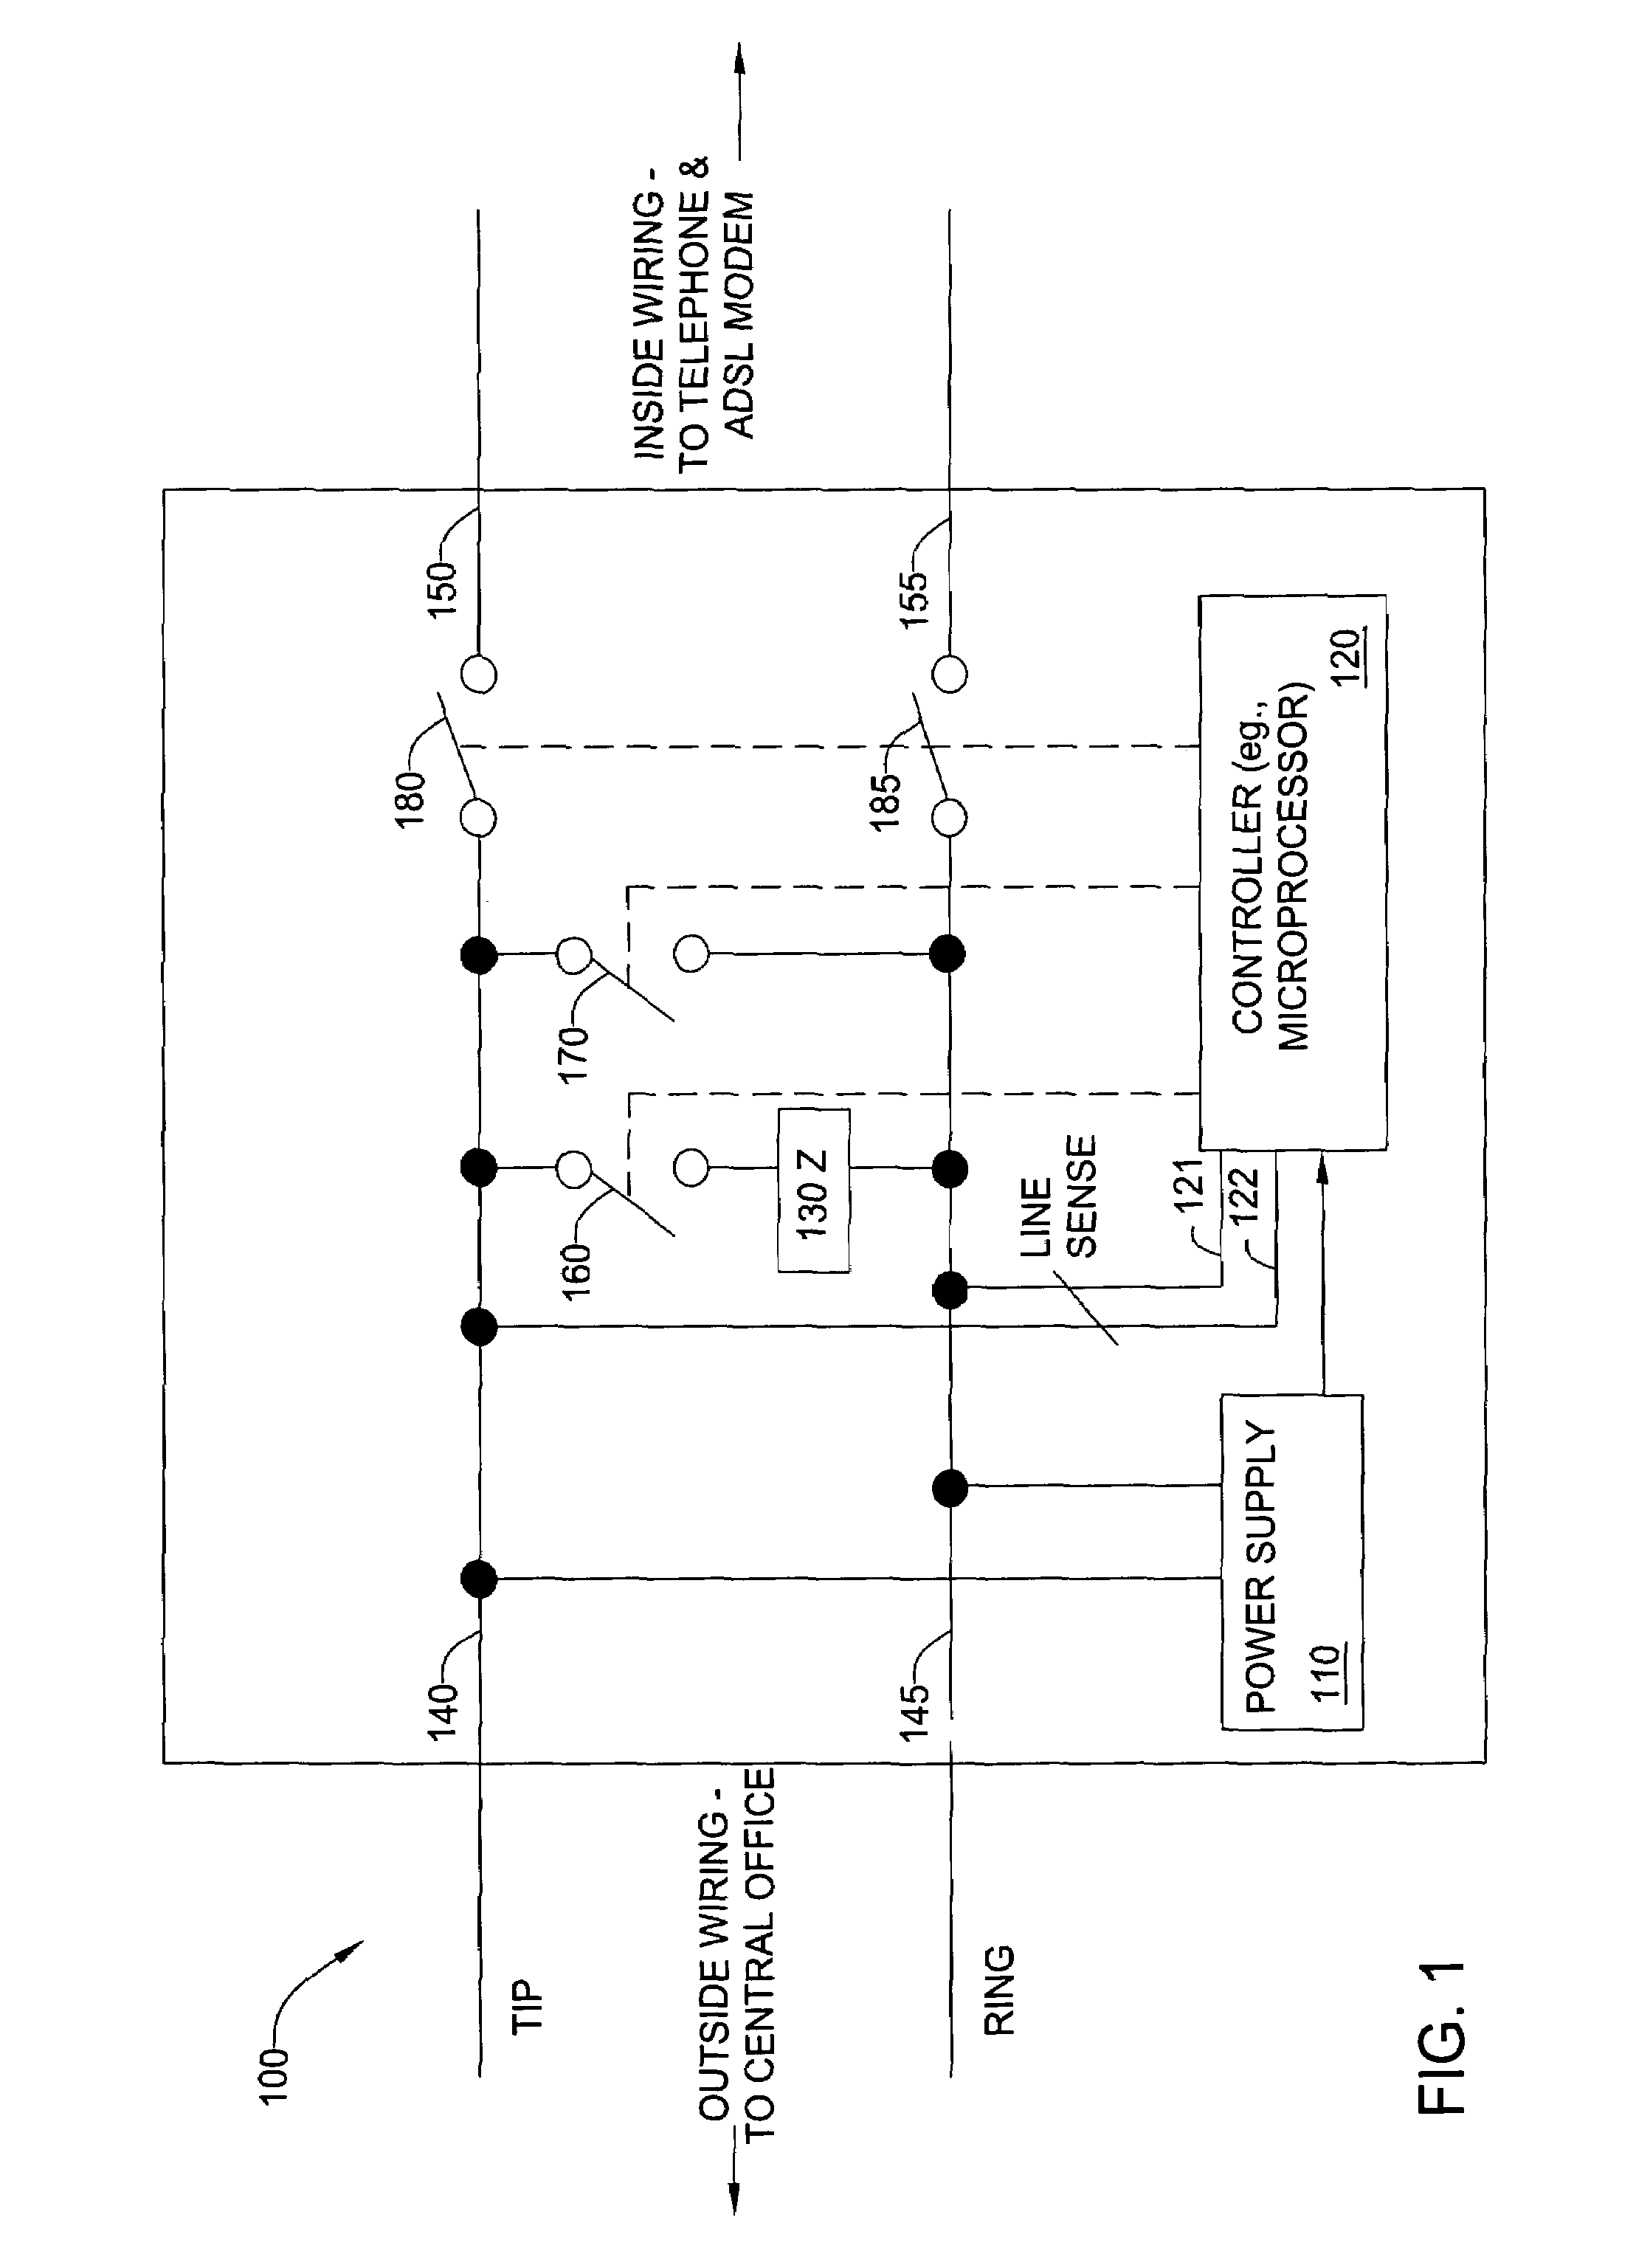 Method and apparatus for automated asymmetric digital subscriber line loop testing